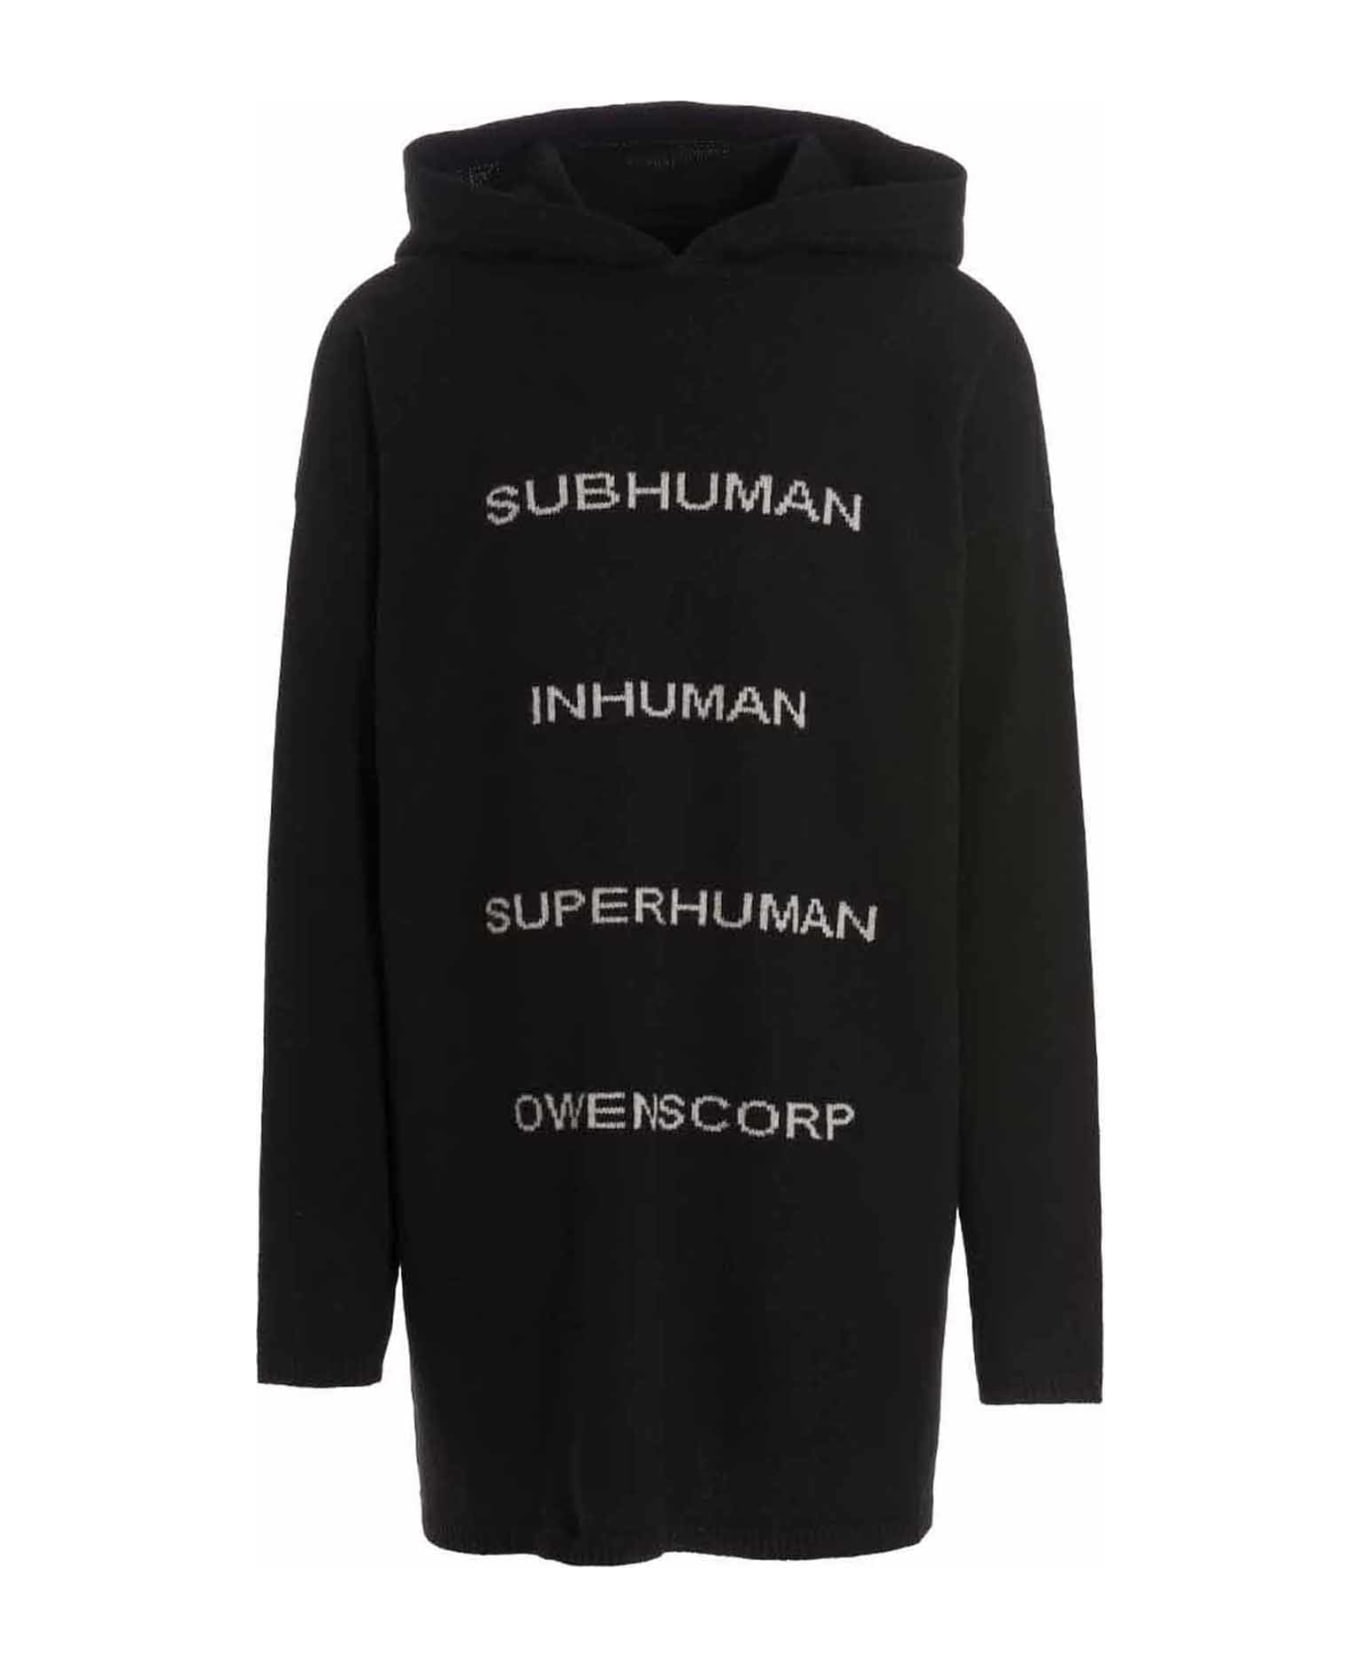 Rick Owens 'tommy' Hooded Sweater ニットウェア